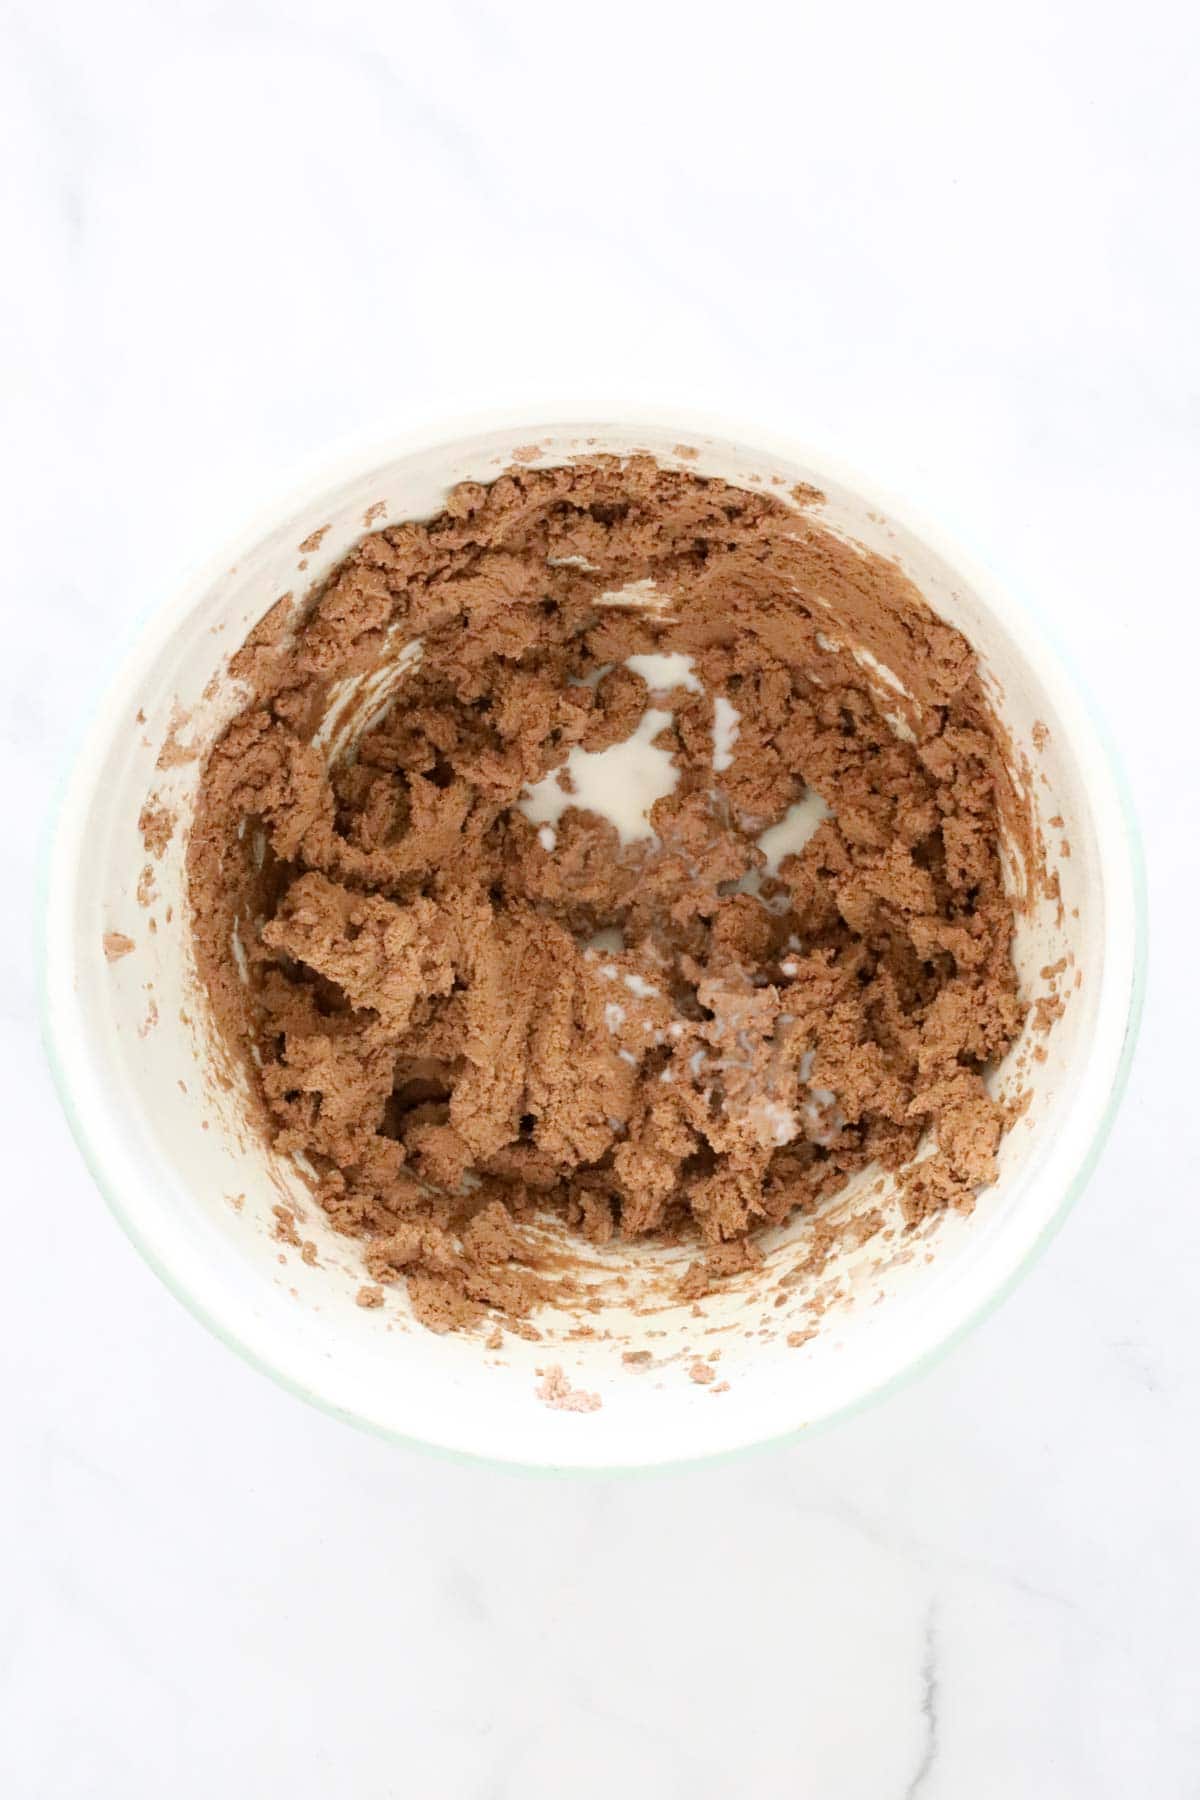 Milk added to the whisked butter cocoa mixture.